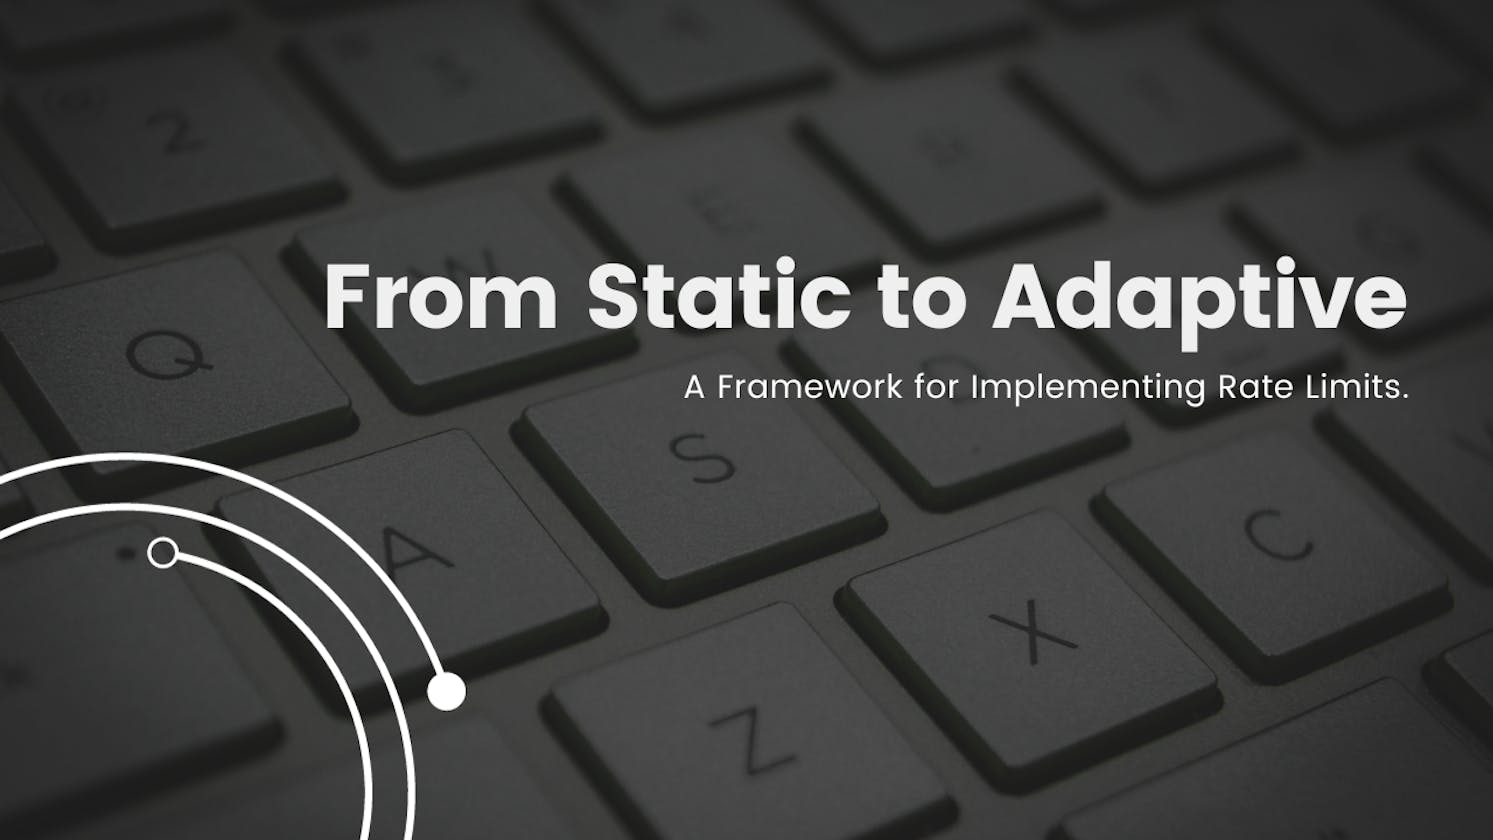 From Static to Adaptive